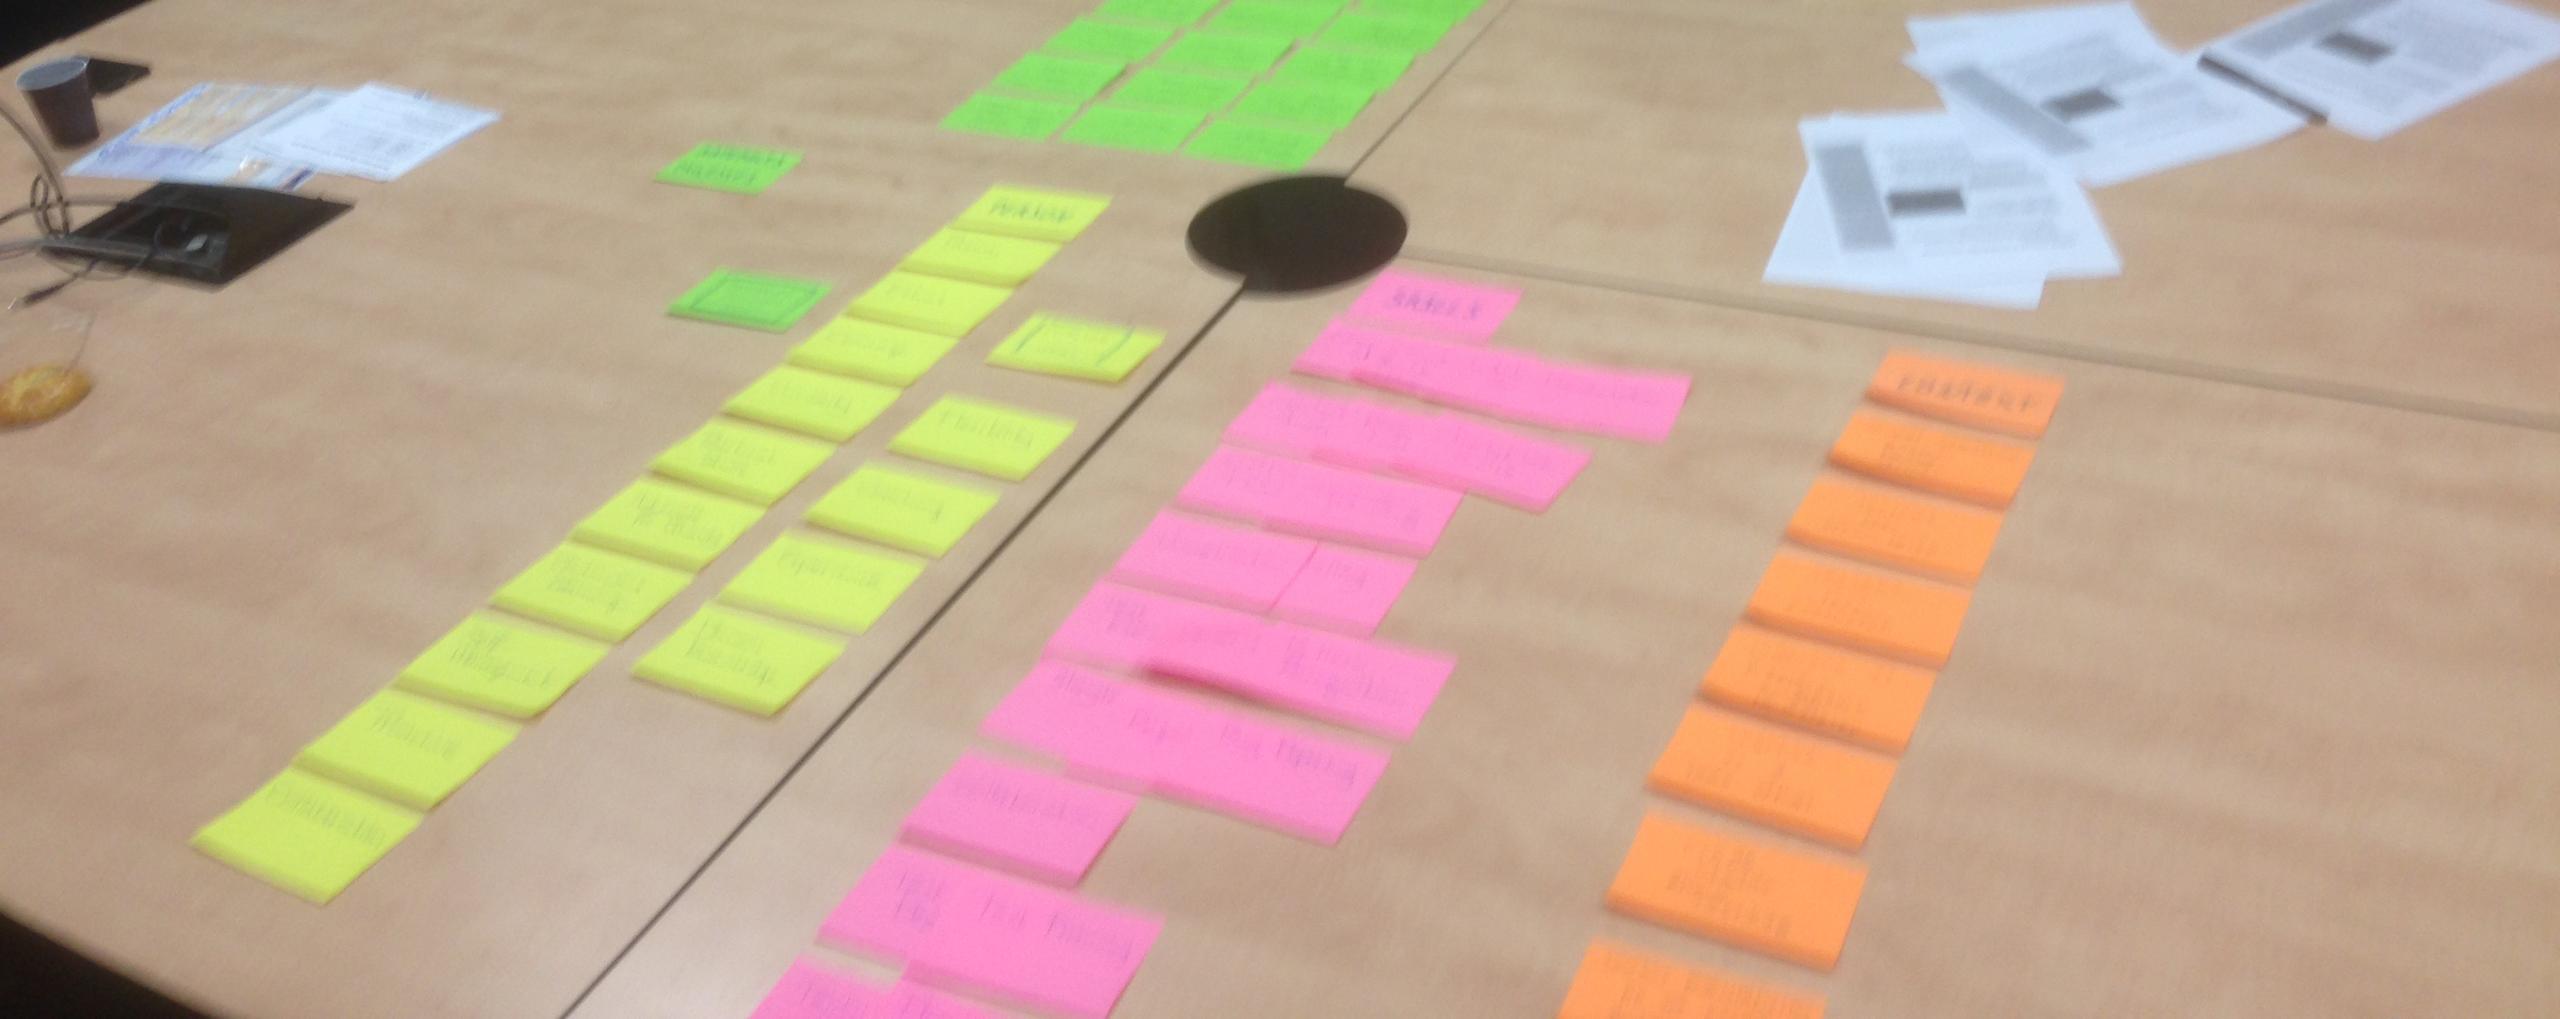 stickies on a table